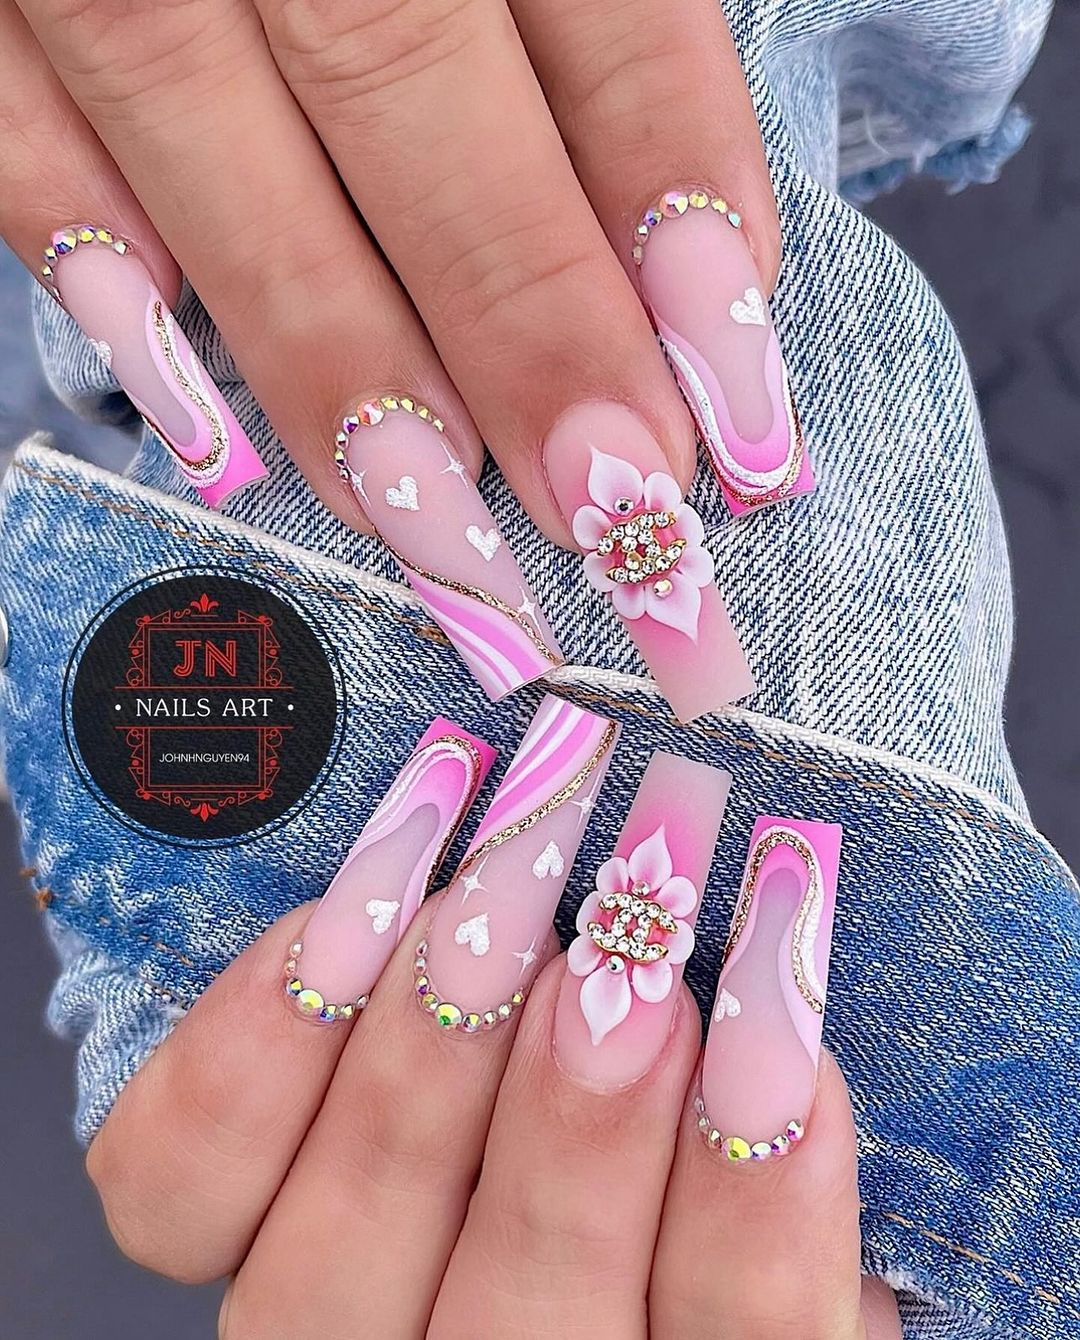 Cute Valentine's Day Nails